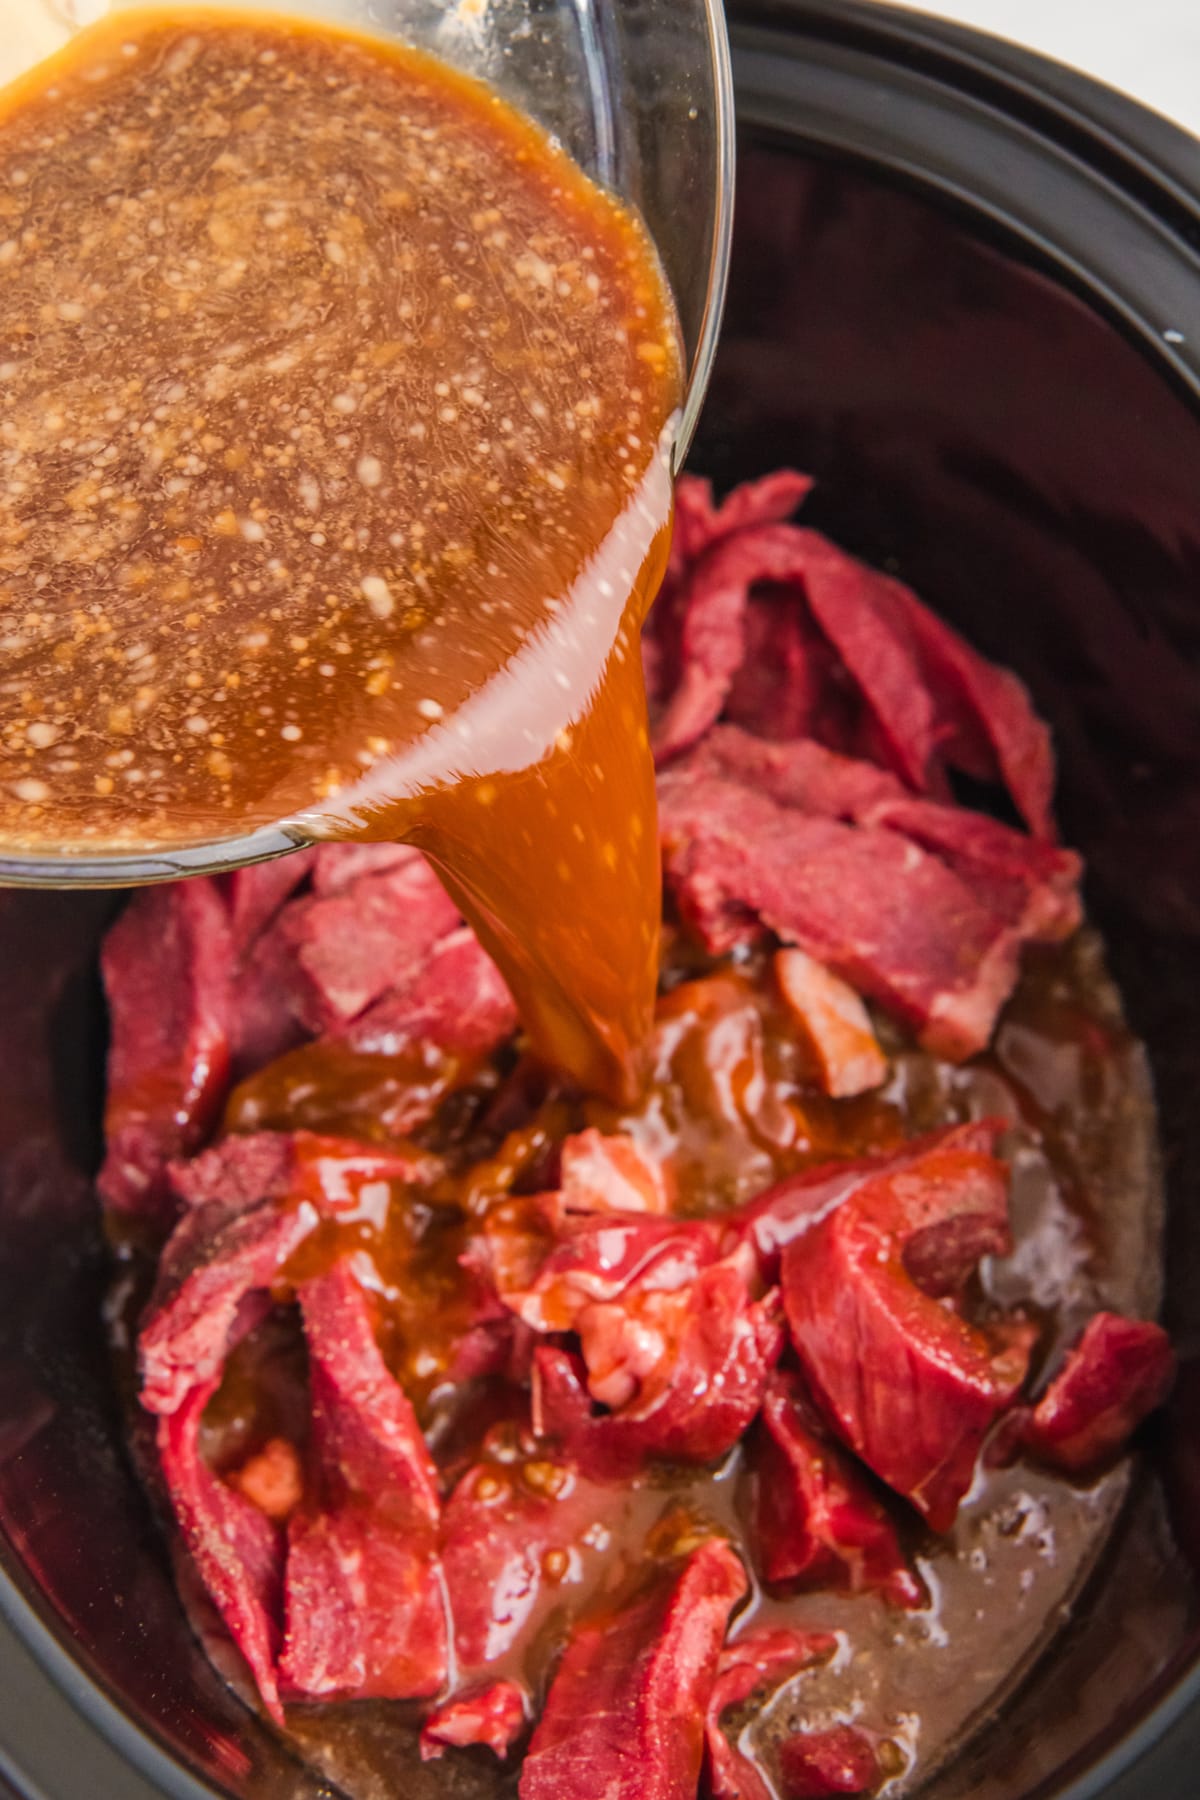 A sauce being poured over beef in a slow cooker is another process in preparing Slow Cooker Beef and Broccoli